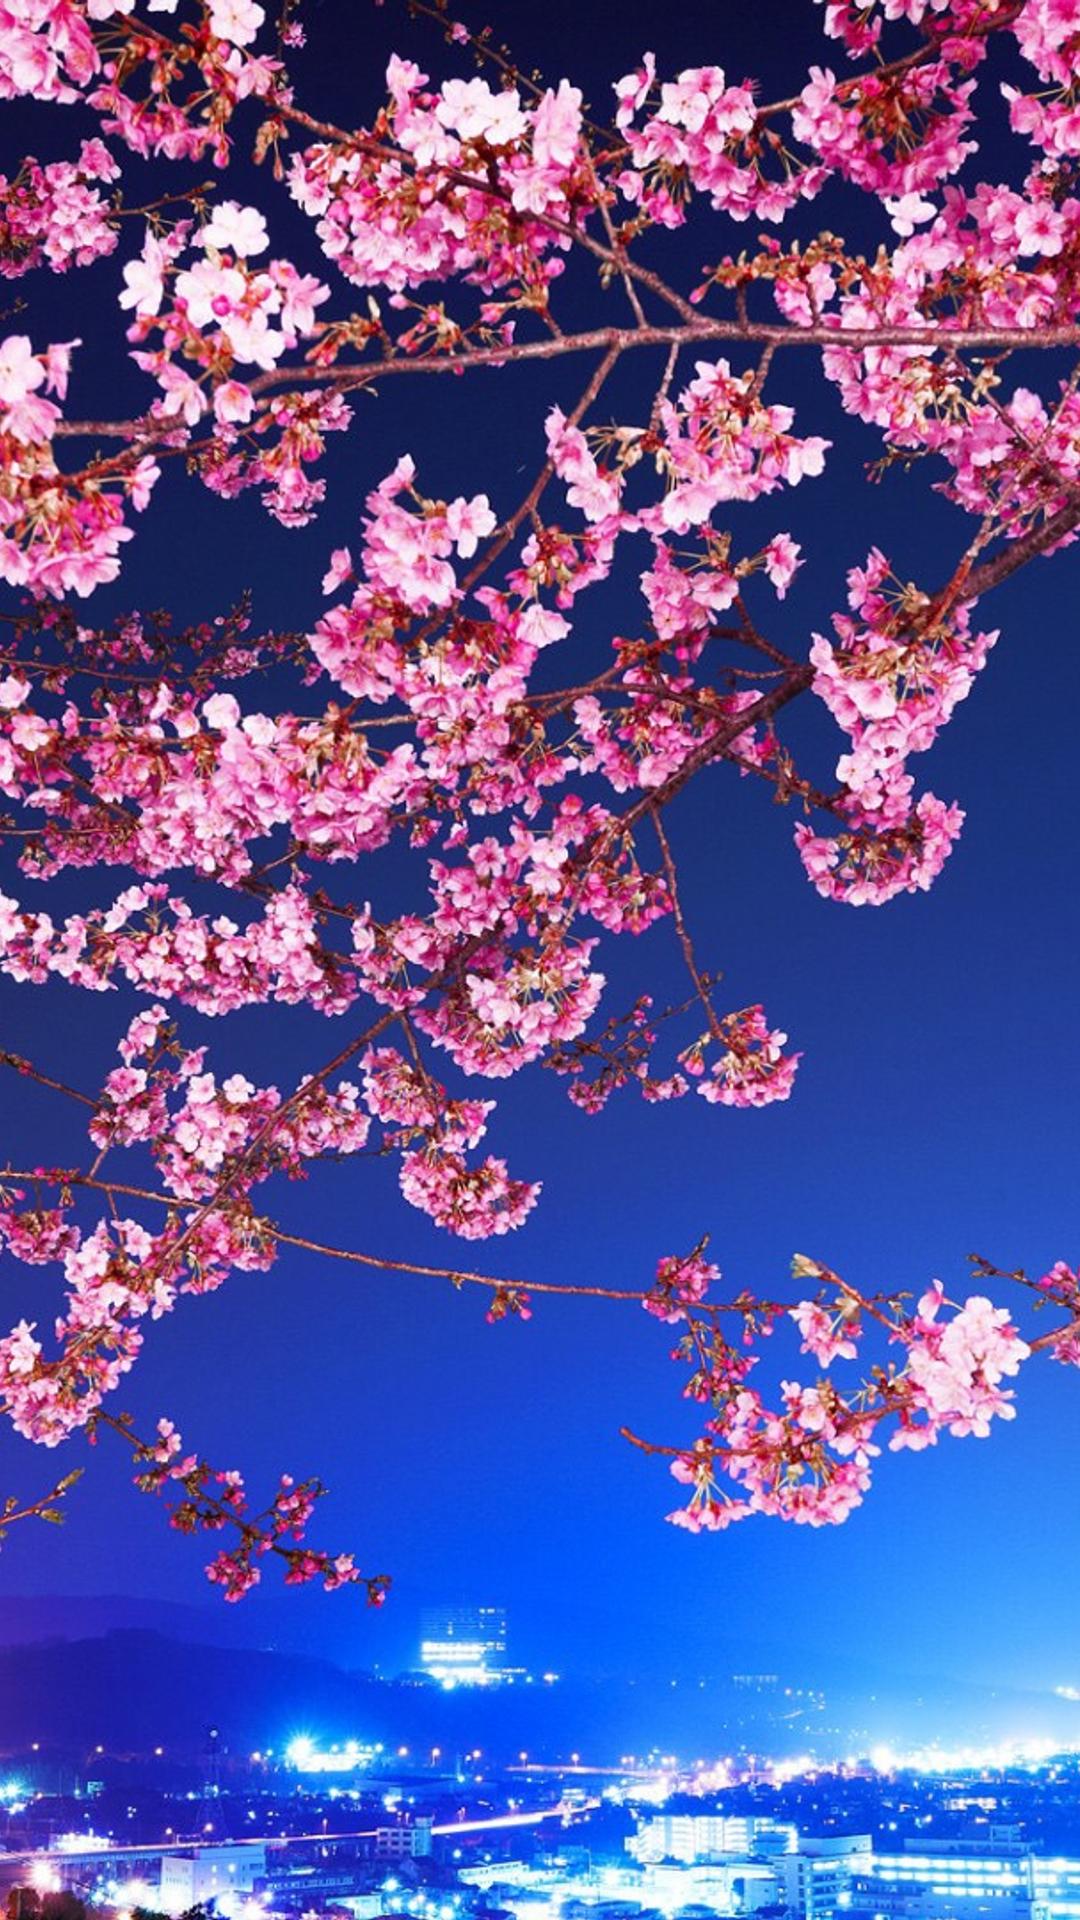 Pink flowers on branches - Cherry blossom Wallpaper Download 1080x1920